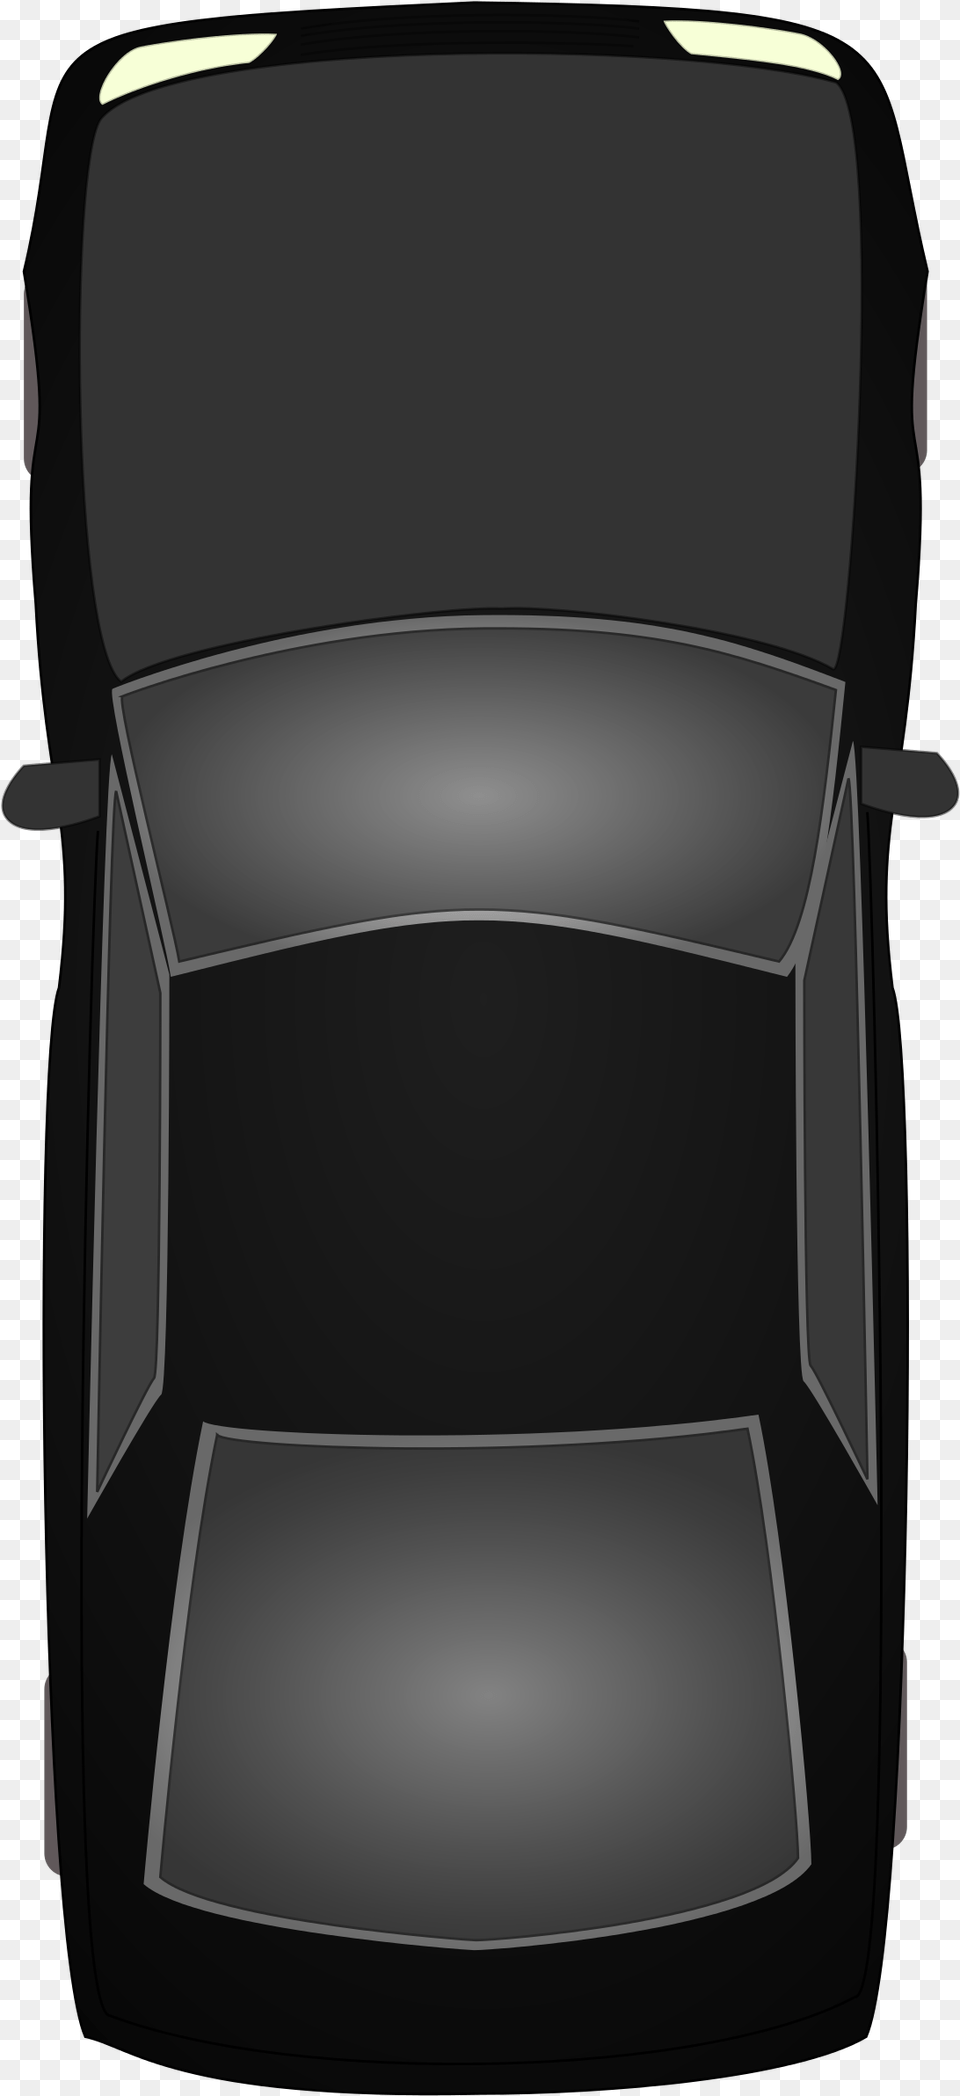 Back Of Car 88 Images In Collectio Bag, Cushion, Home Decor, Backpack Free Png